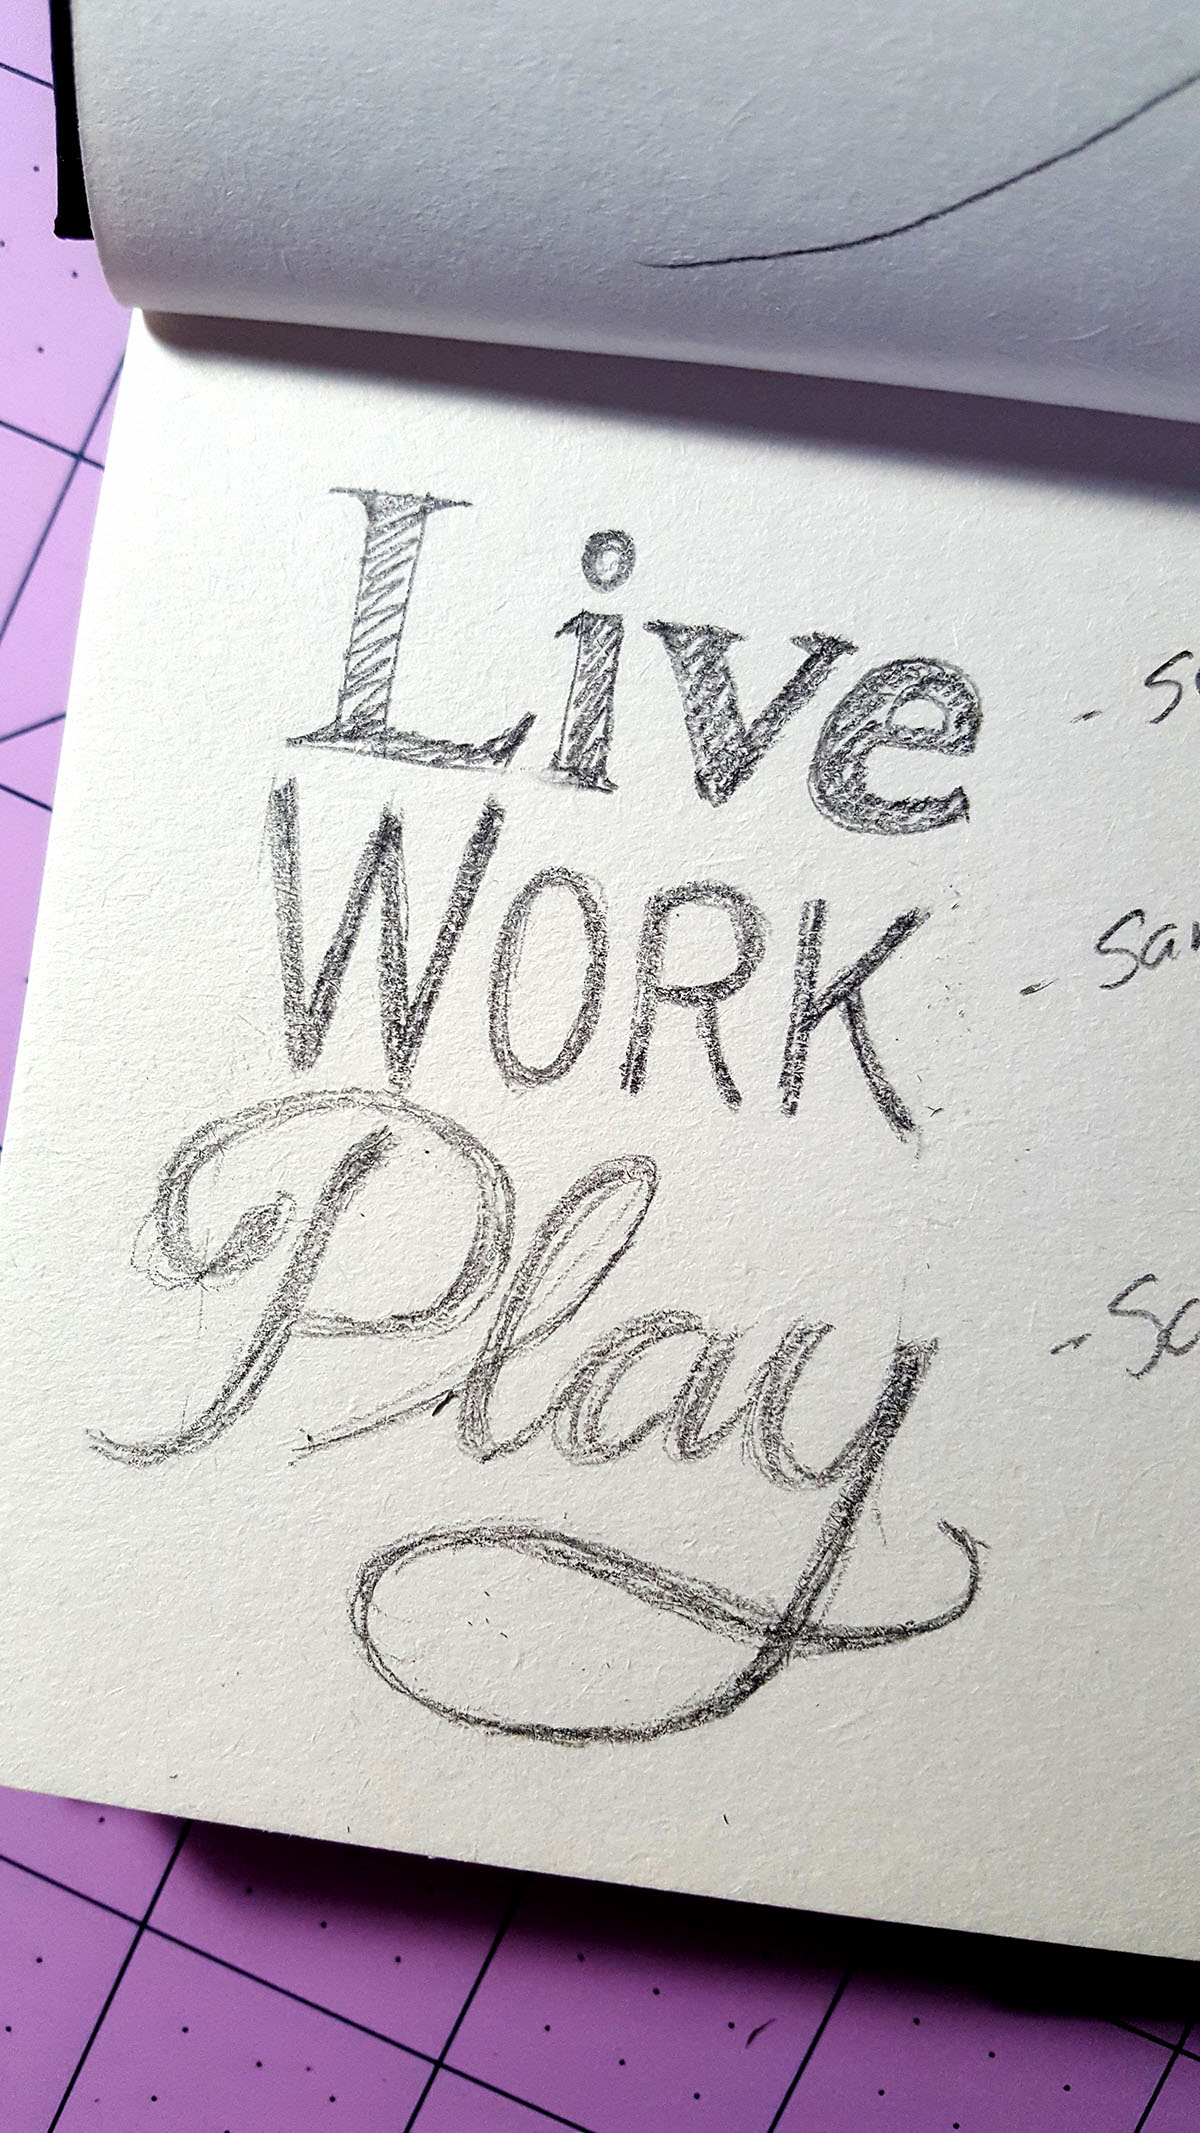 sketchpad with pencil sketch of the words live work play